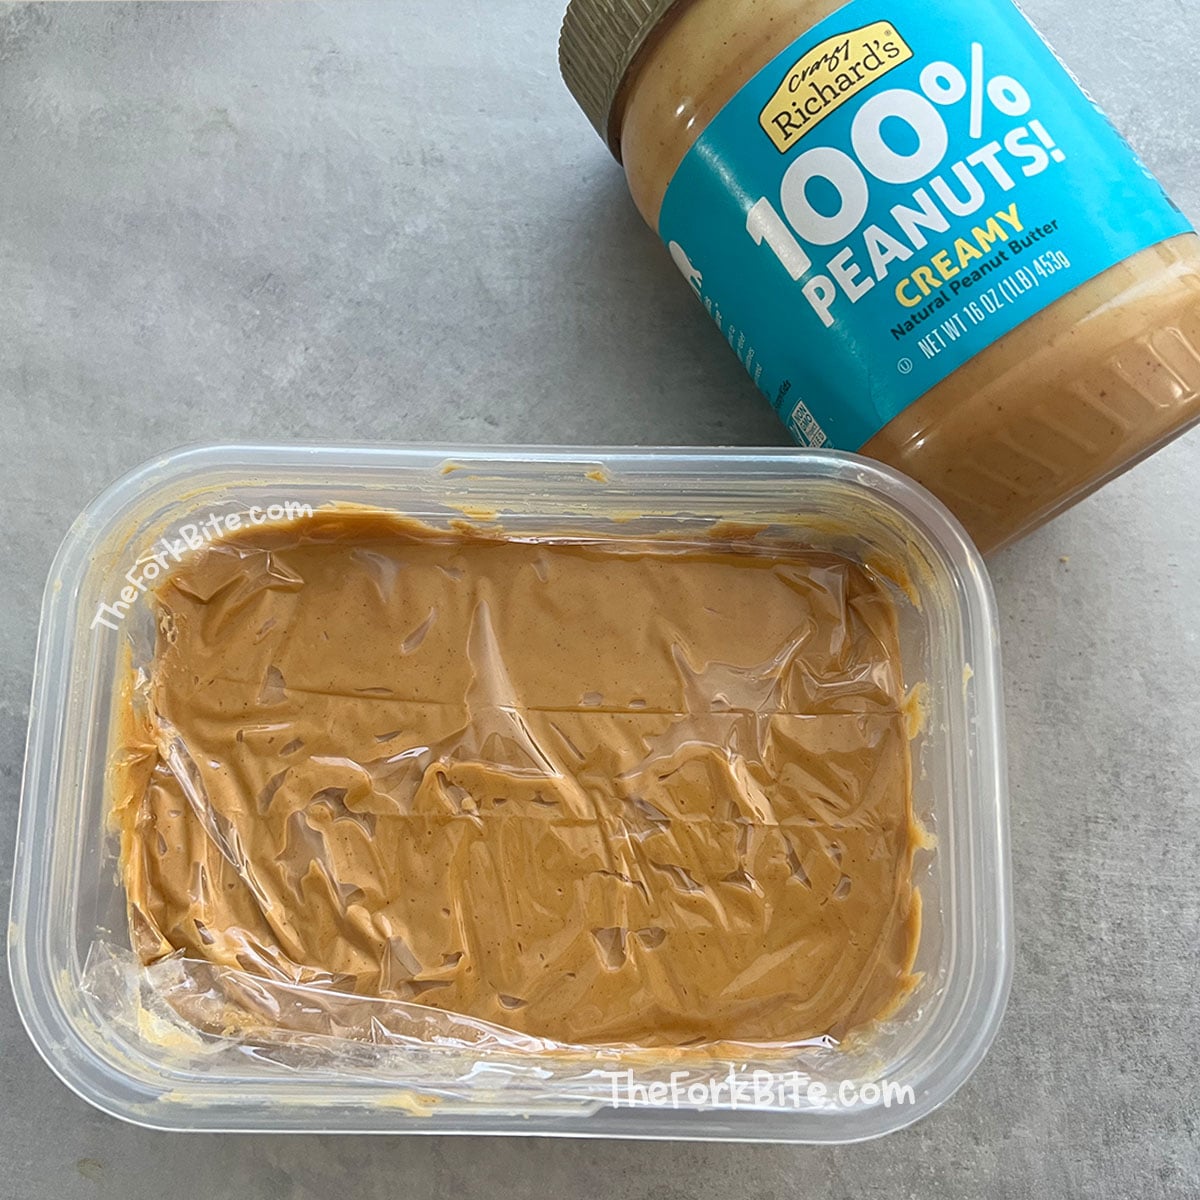 Place the peanut butter in airtight containers suitable for freezing, allowing a small amount of headspace to accommodate freezer expansion.